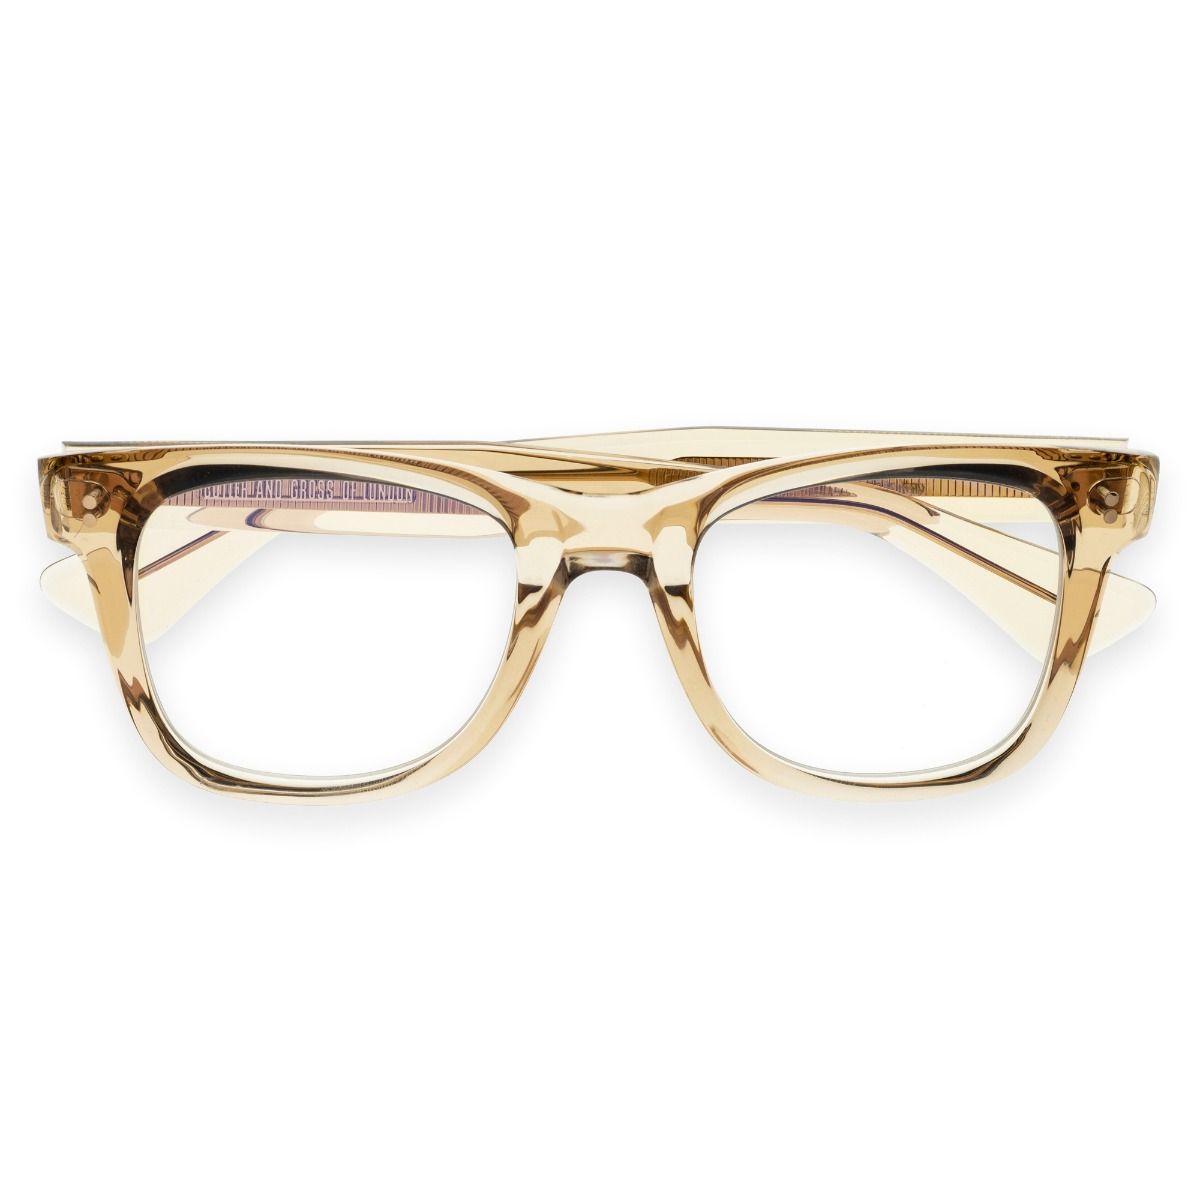 Cutler and Gross, 9101 Optical Square Glasses - Granny Chic